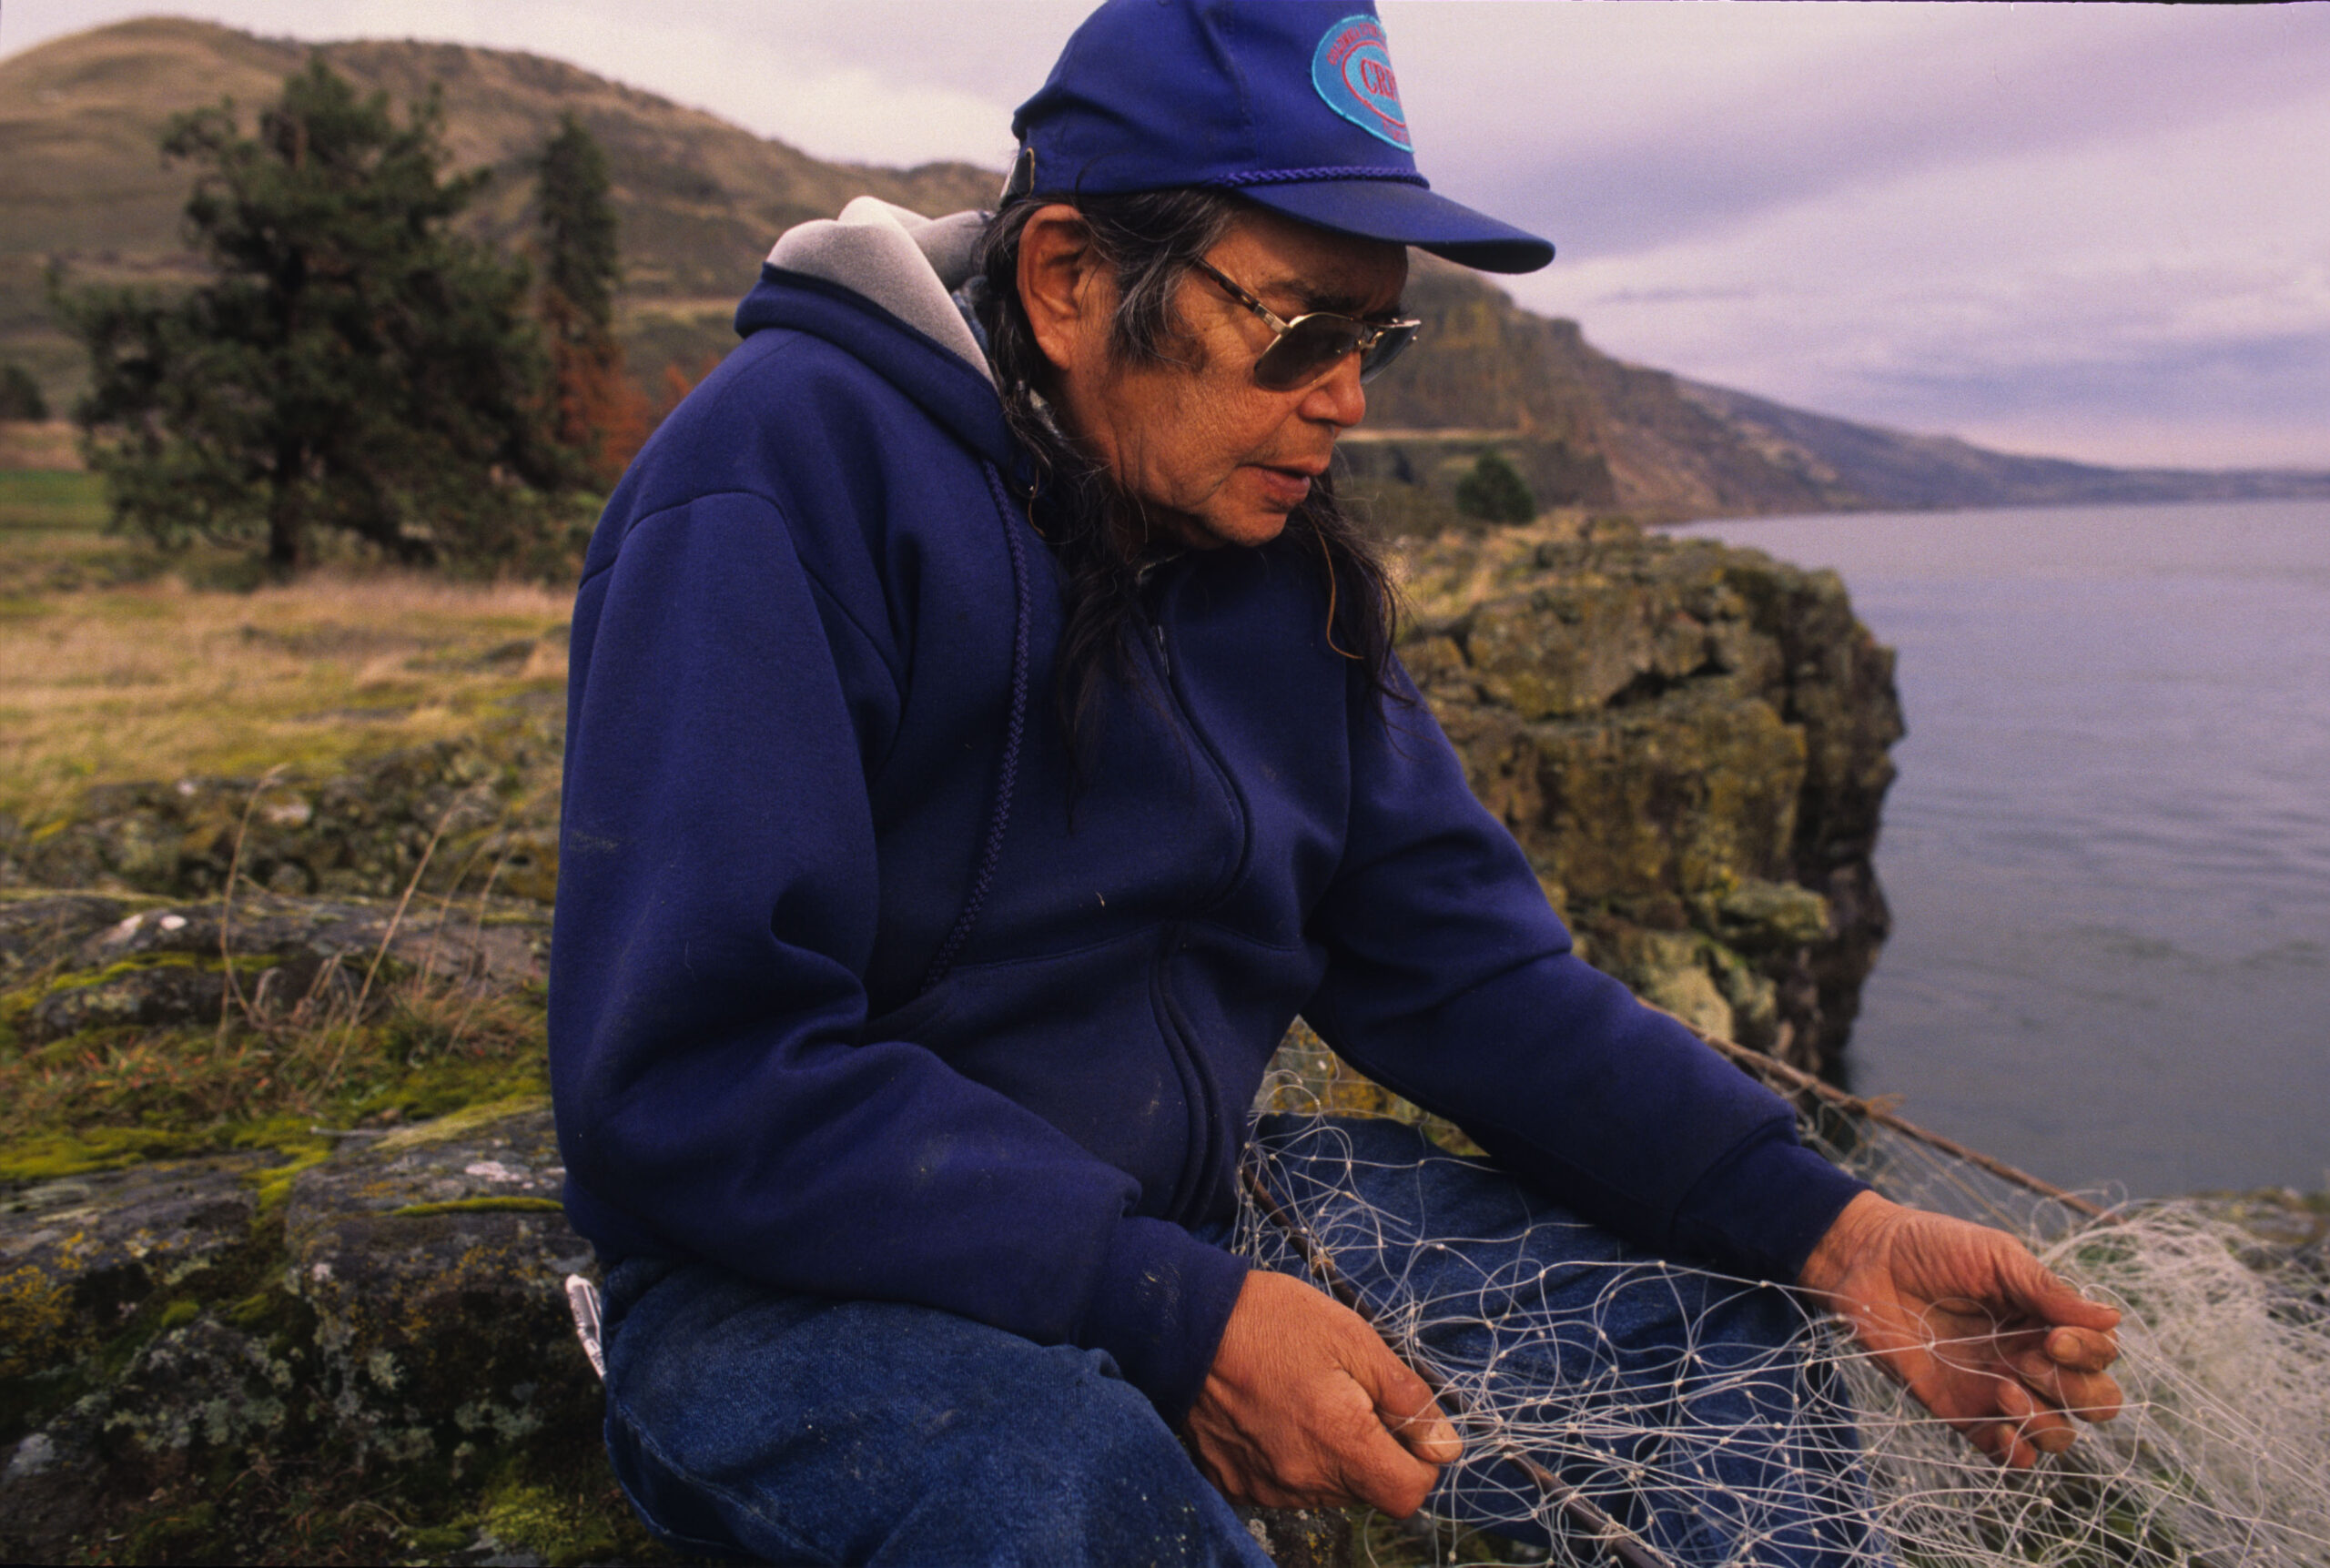 A man in a blue hat holding a fishing net.